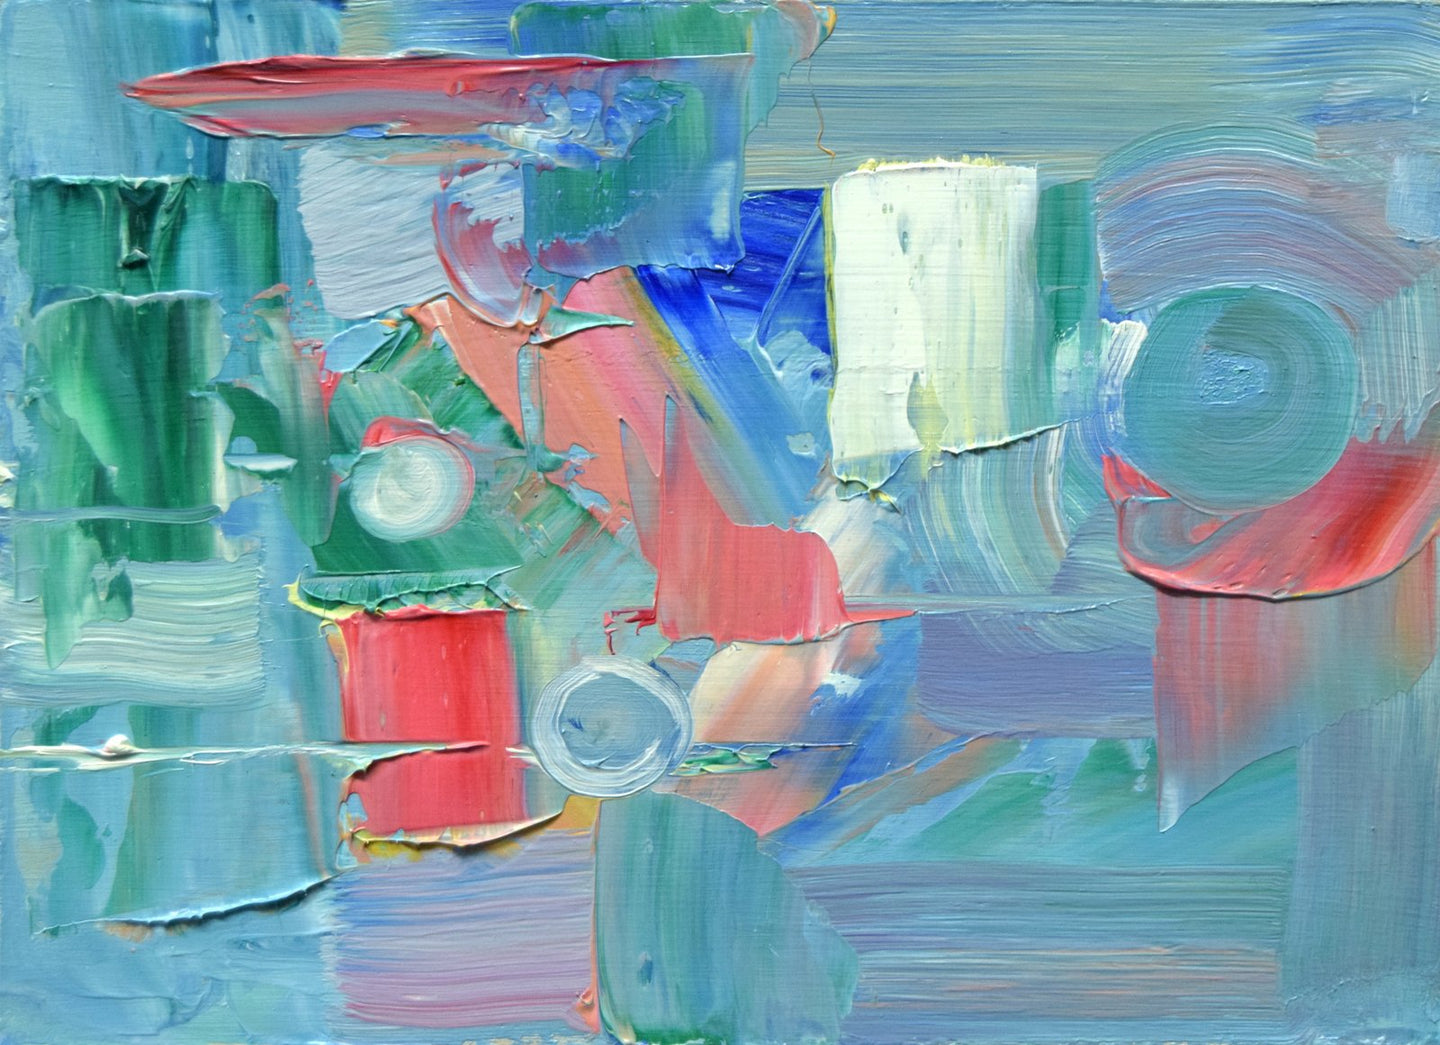 Abstract oil painting with slabs of blue and green paint with some impasto strokes of red and white, with three circular swirls, akin to the innards of a clock